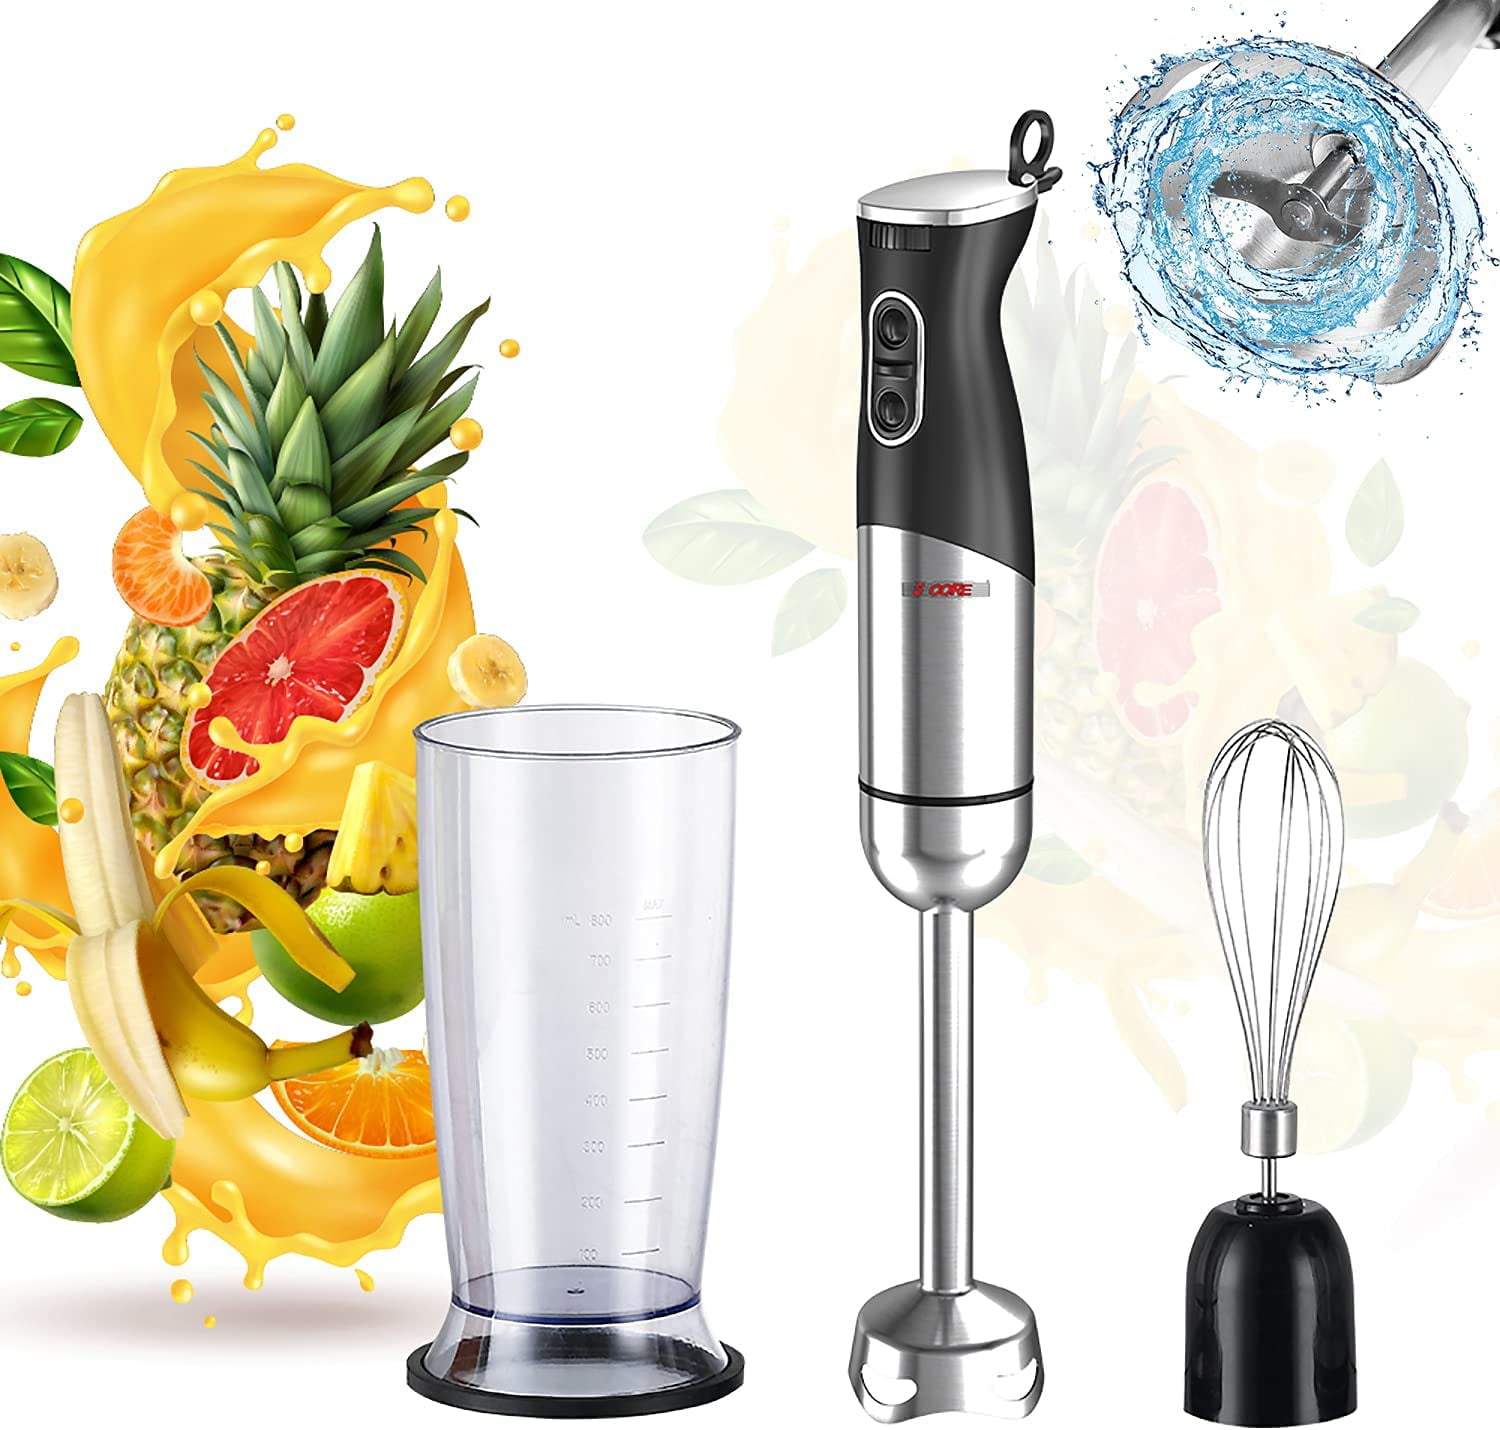 5 Core Immersion Blender Handheld 400W Copper Motor w 800ml Mixing